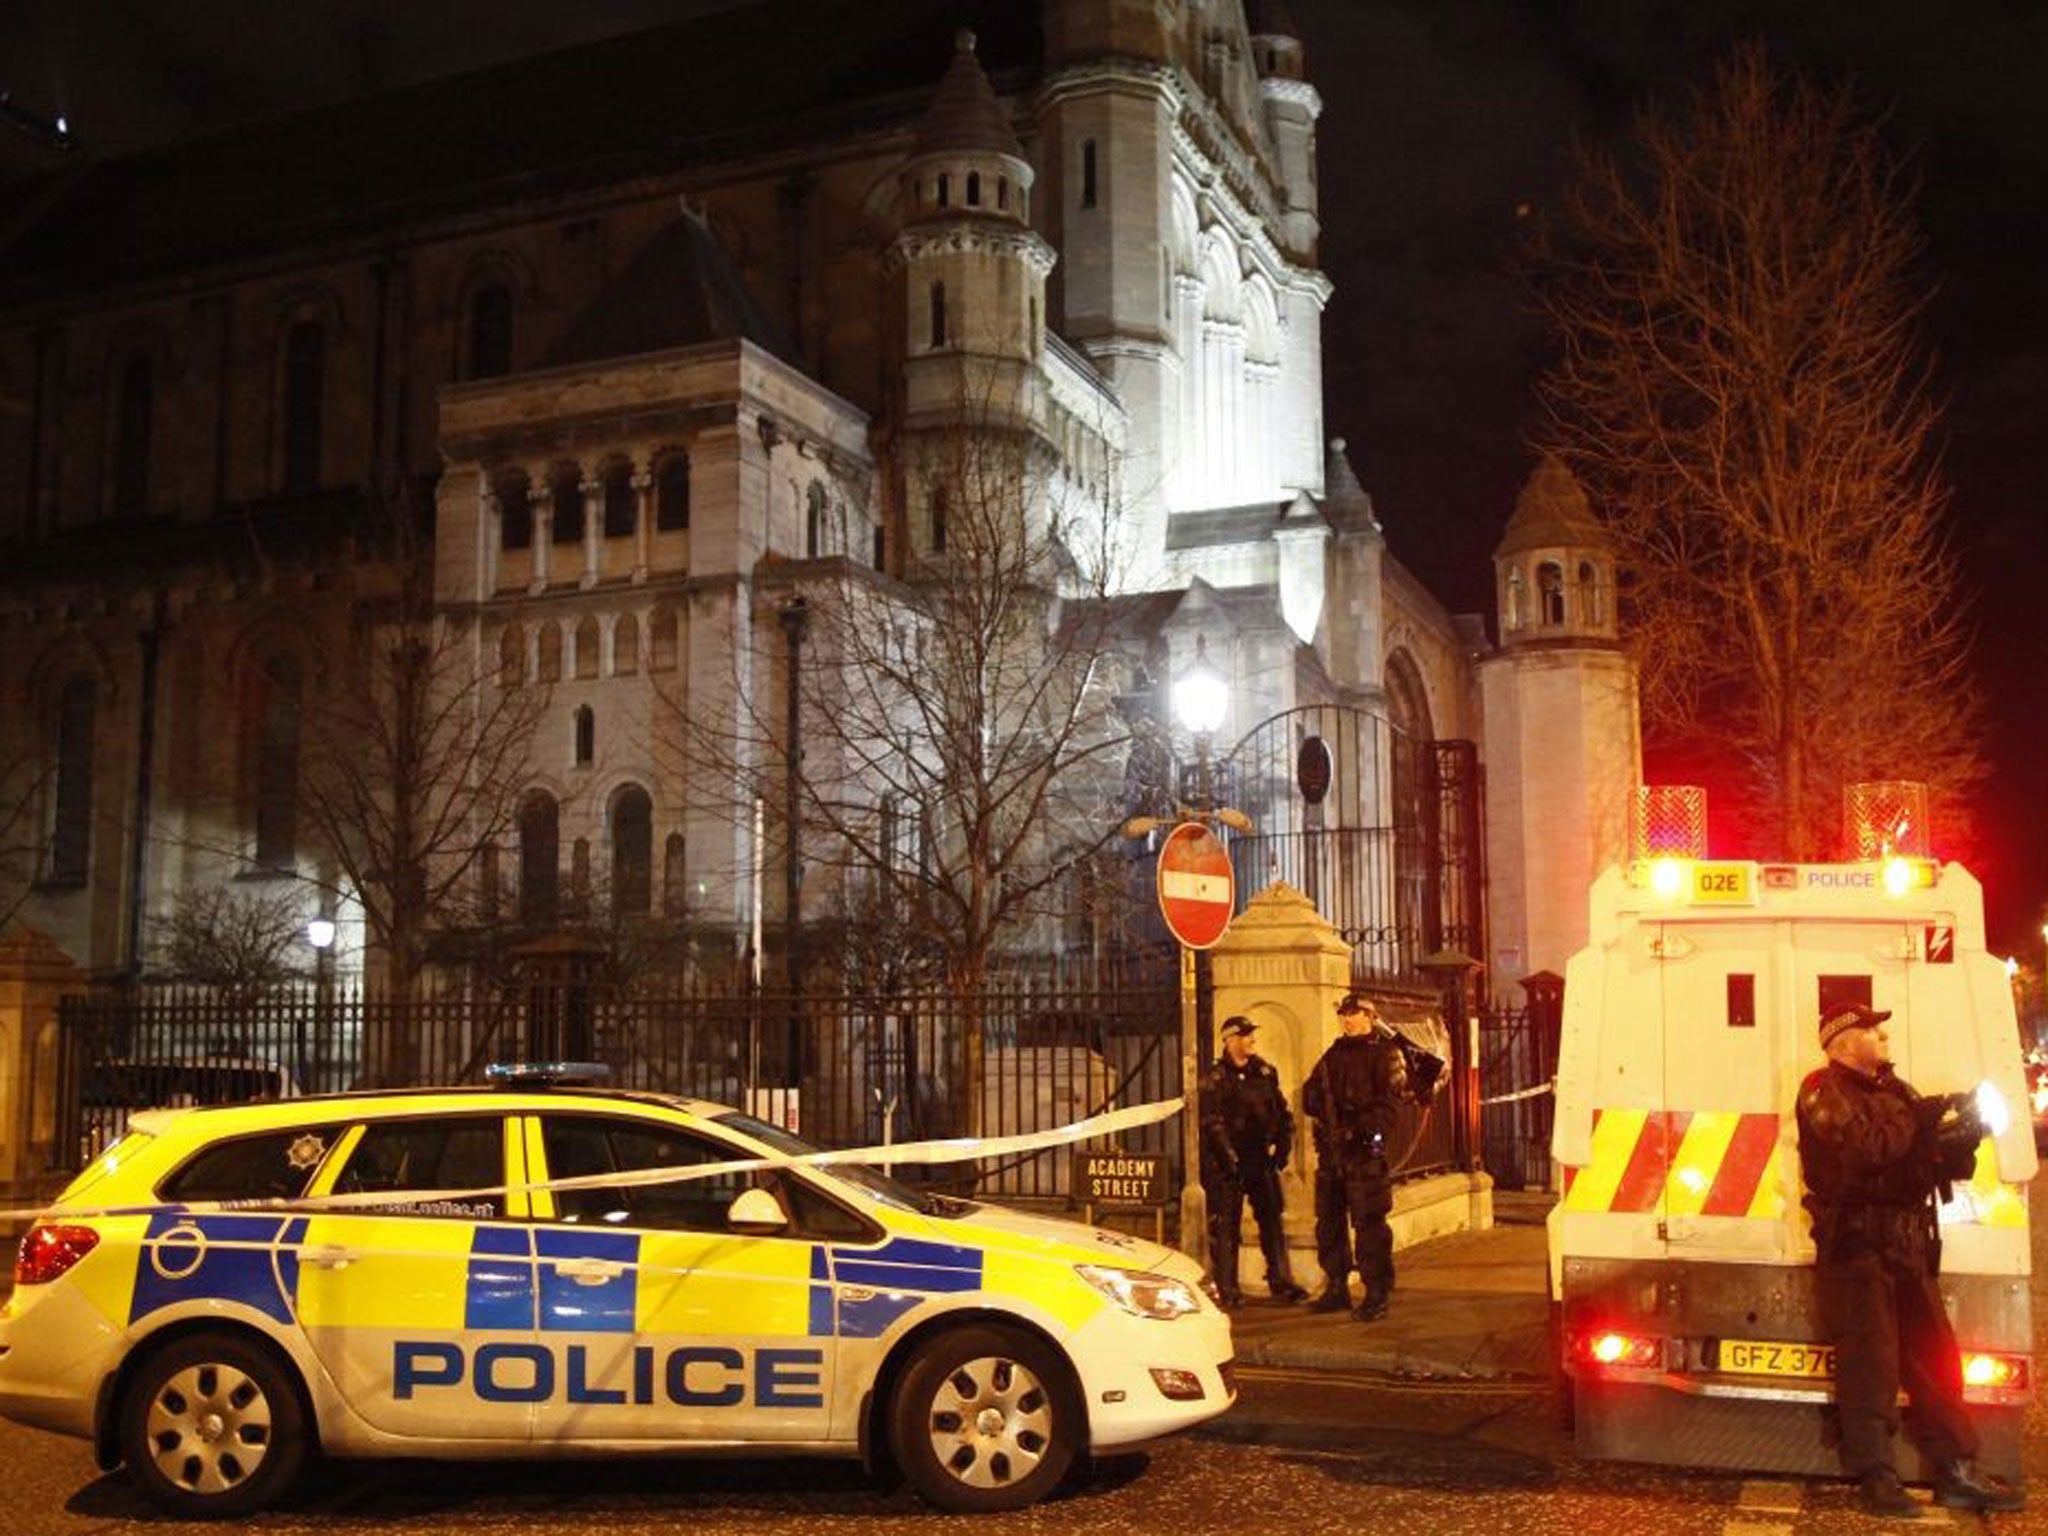 Police officers secure the area close to the scene of a small explosion in the Cathedral Quarter in Belfast city centre, Northern Ireland, Friday, 13 Dec 2013.